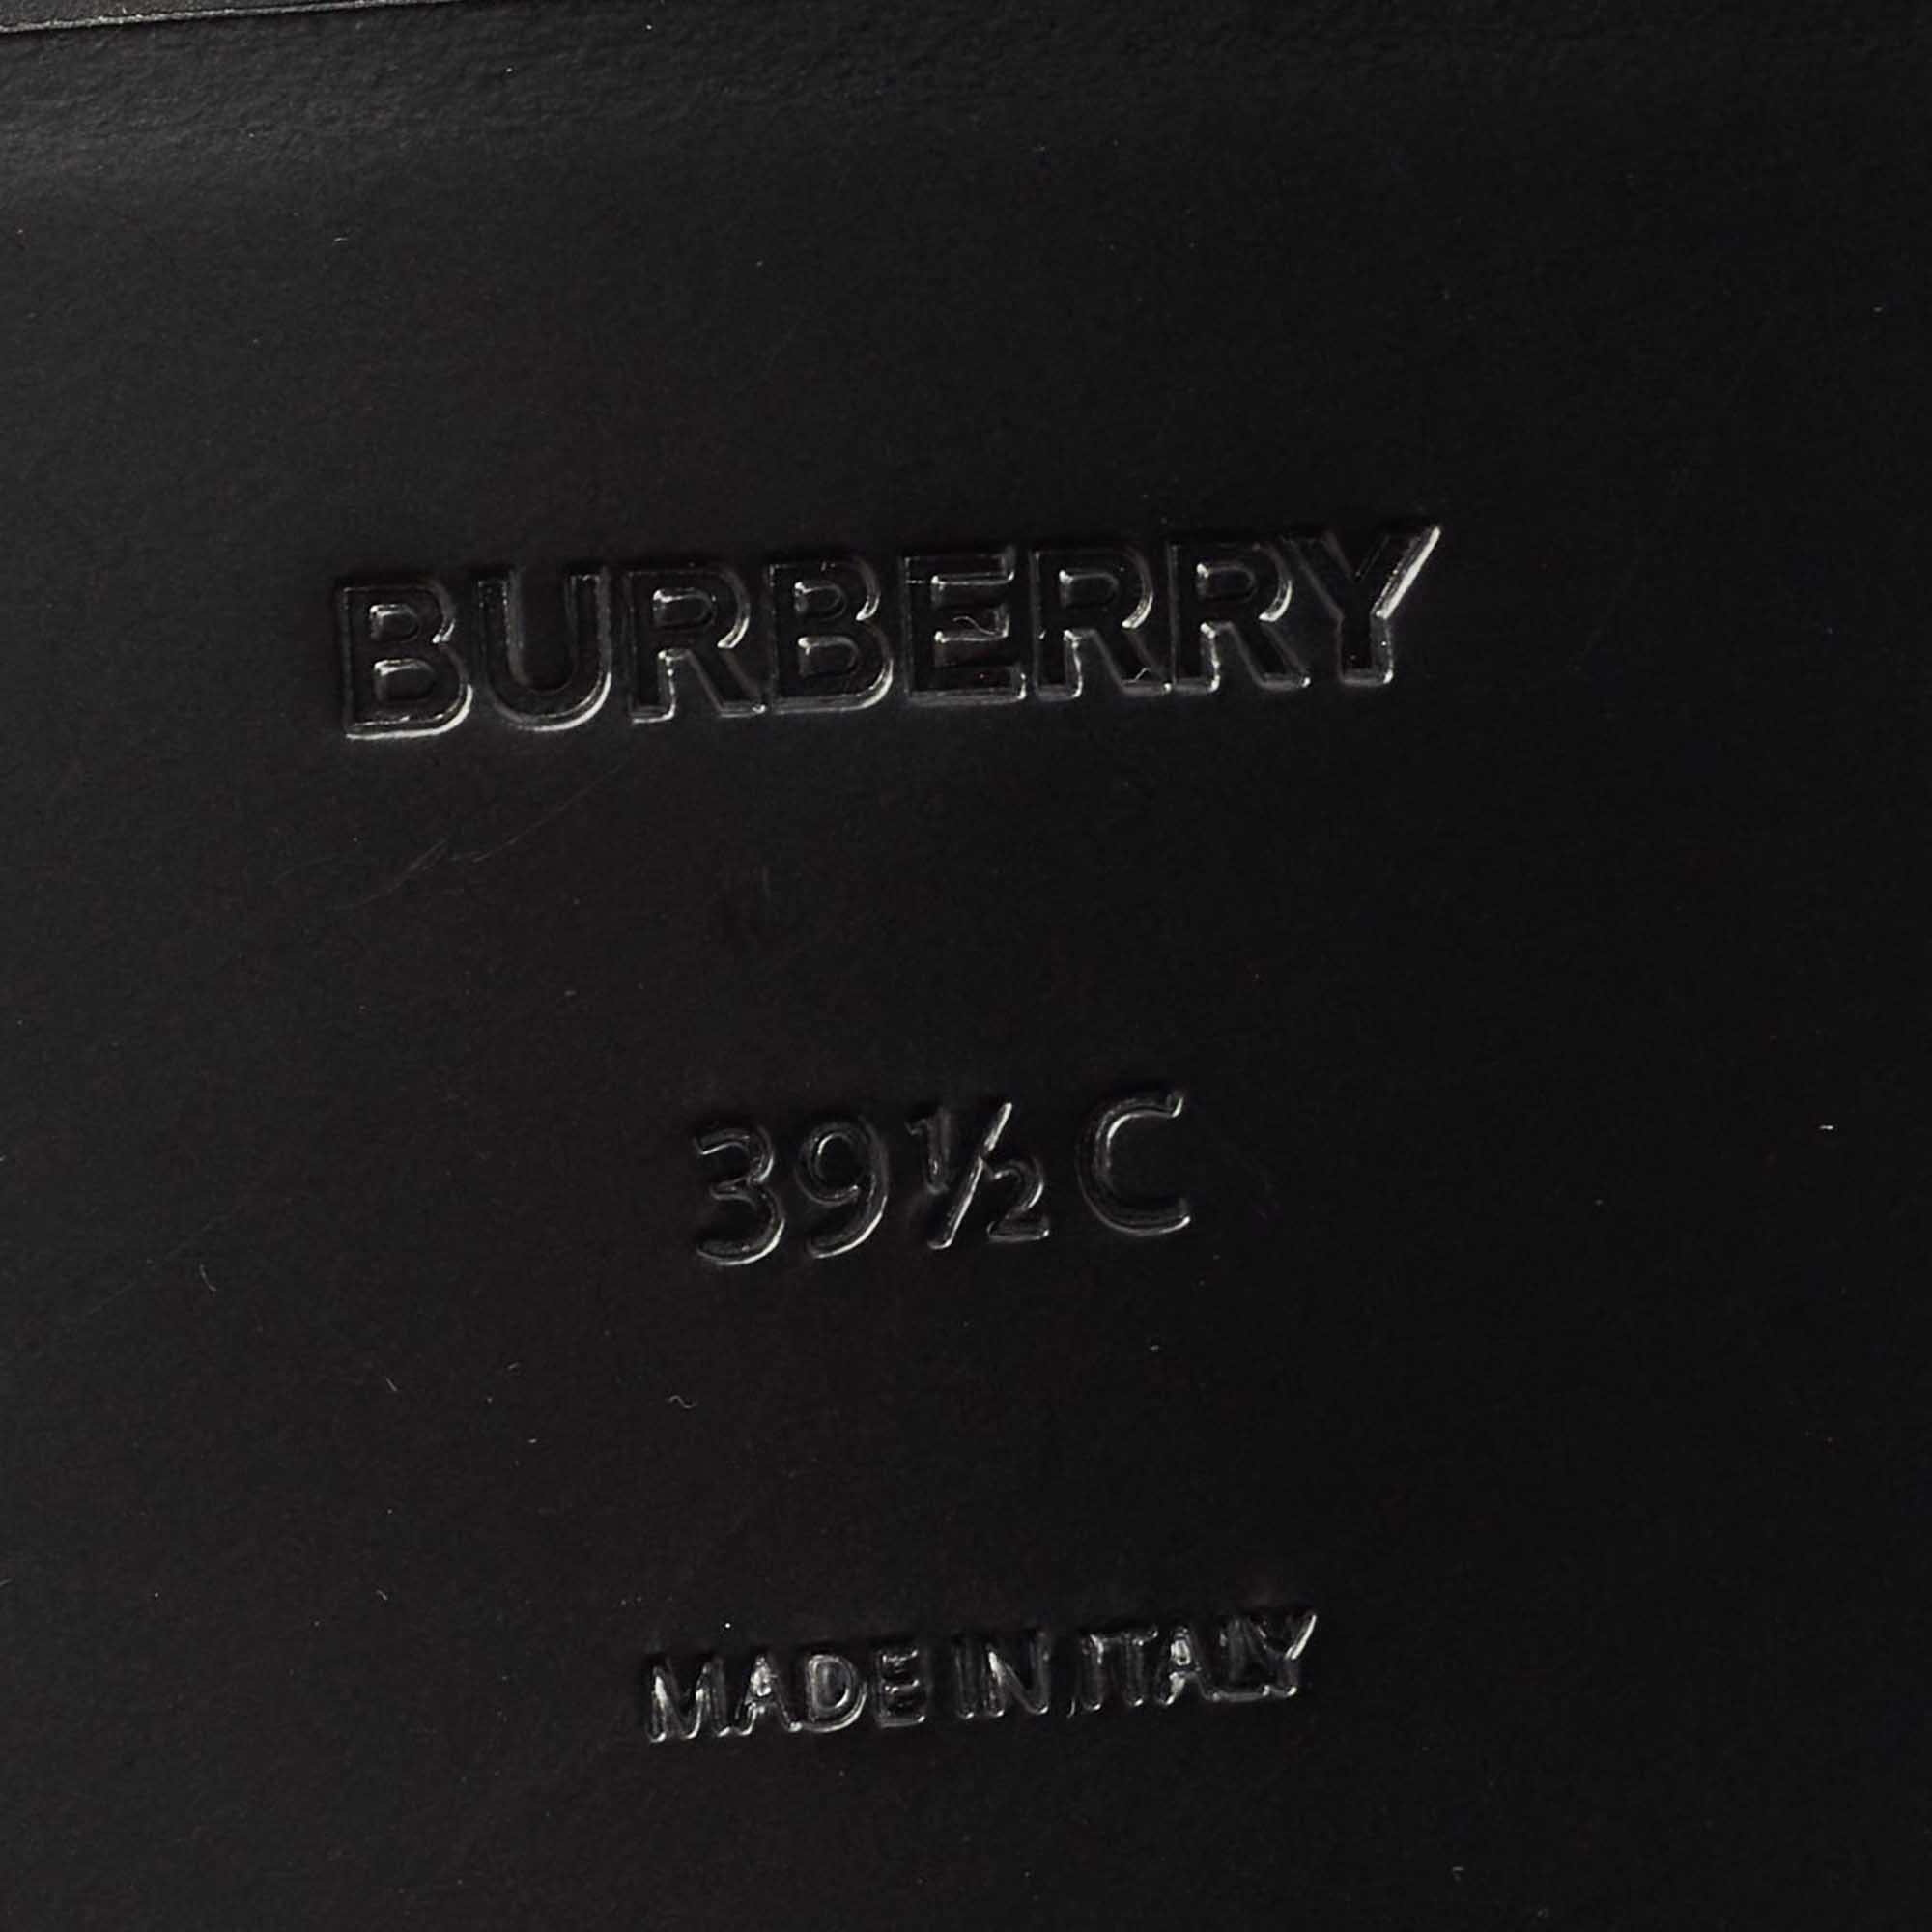 Burberry Black Leather Lace Up Derby Size 39.5